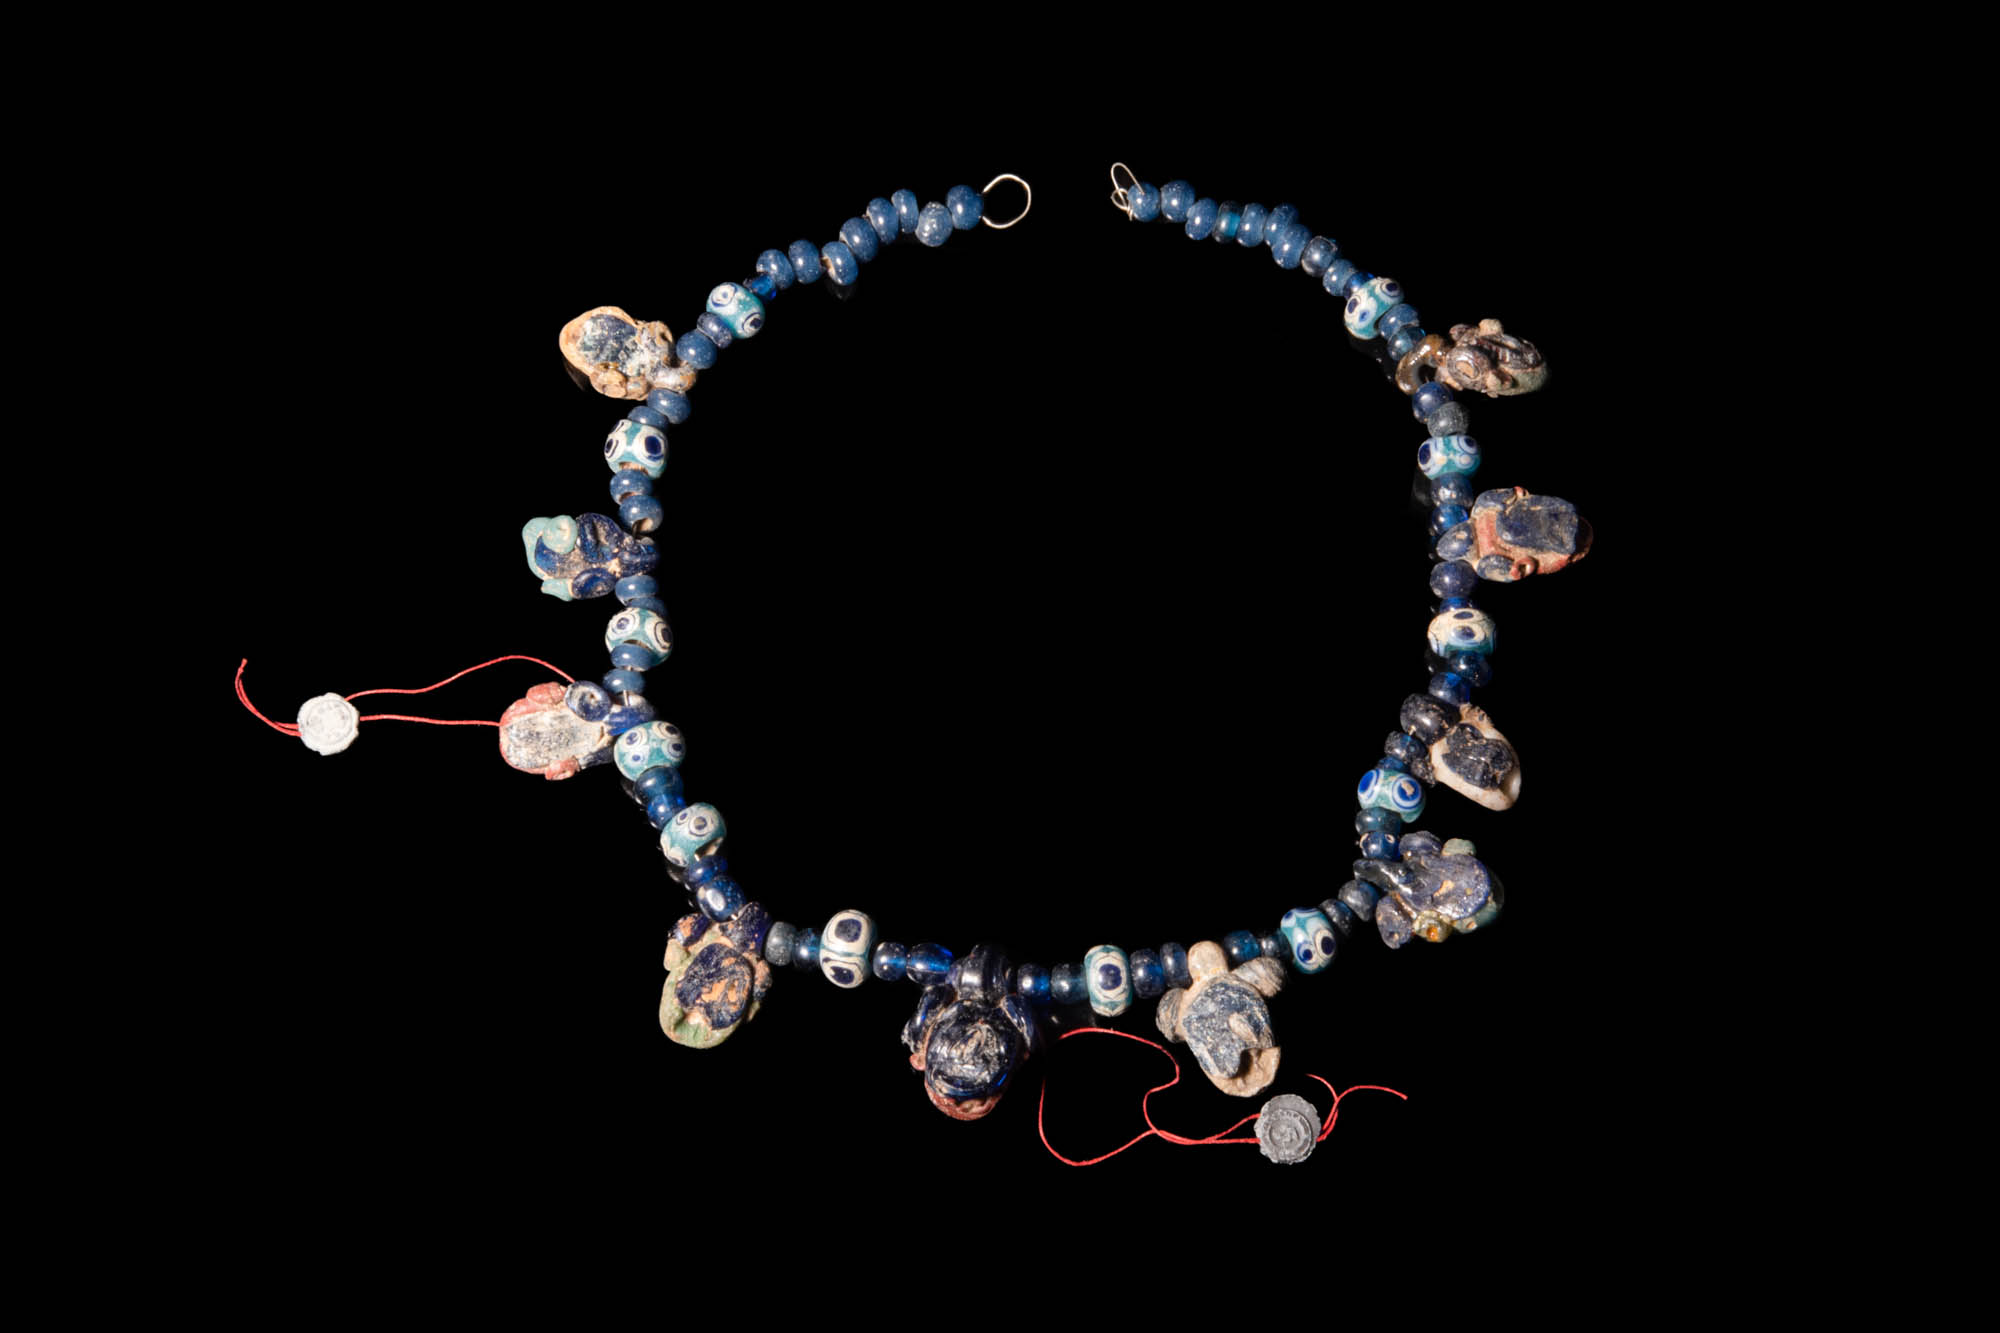 PHOENICIAN GLASS BEADED NECKLACE - Image 2 of 3